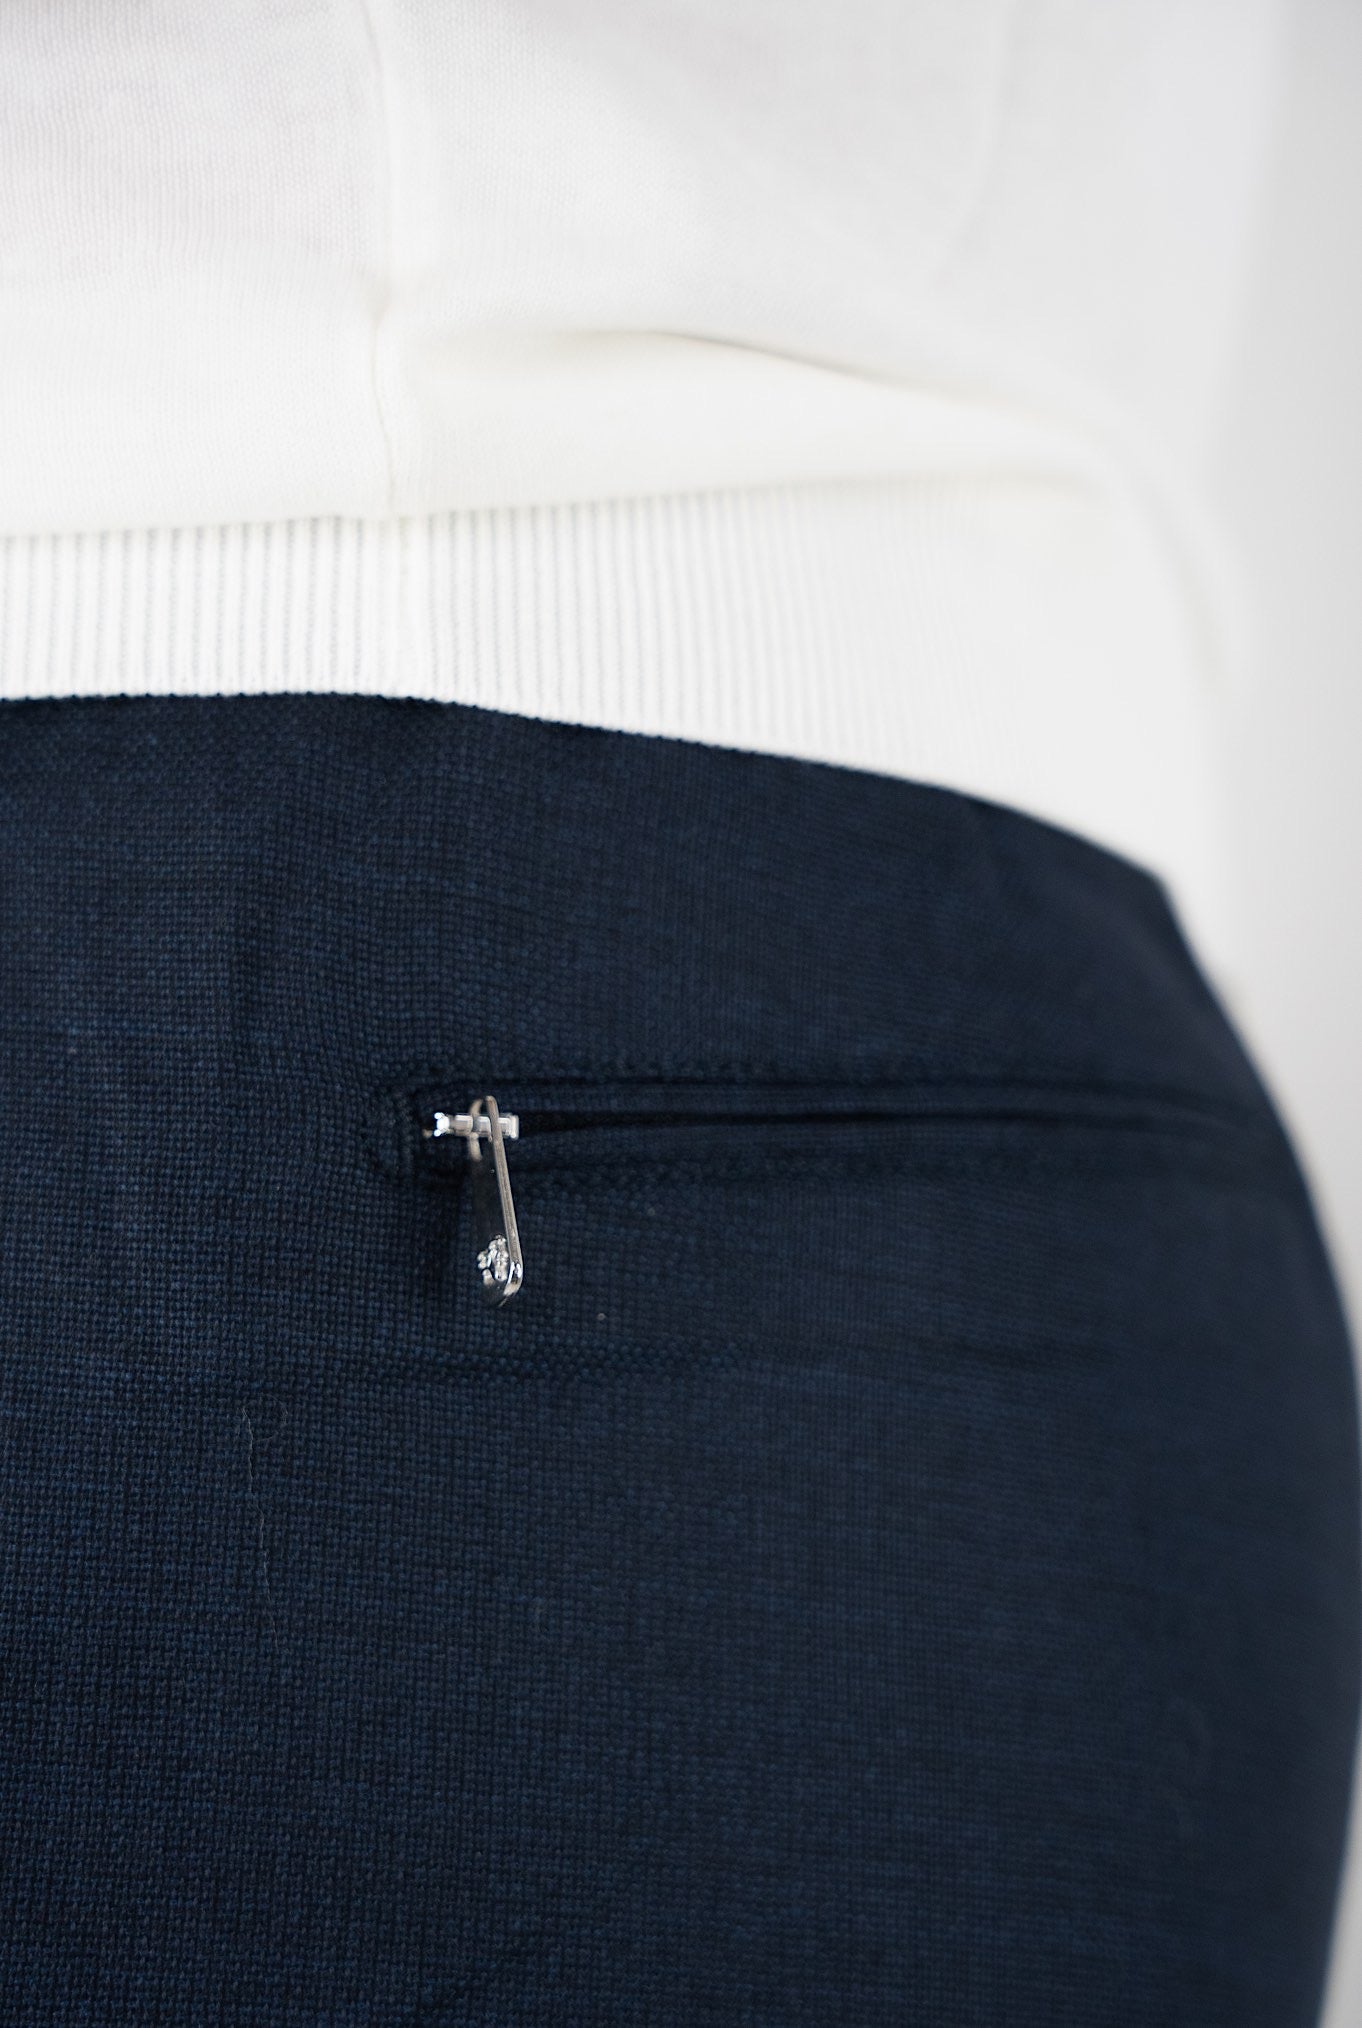 MARCO PESCAROLO Trousers with Drawstring Super 130's Dark Blue Wool